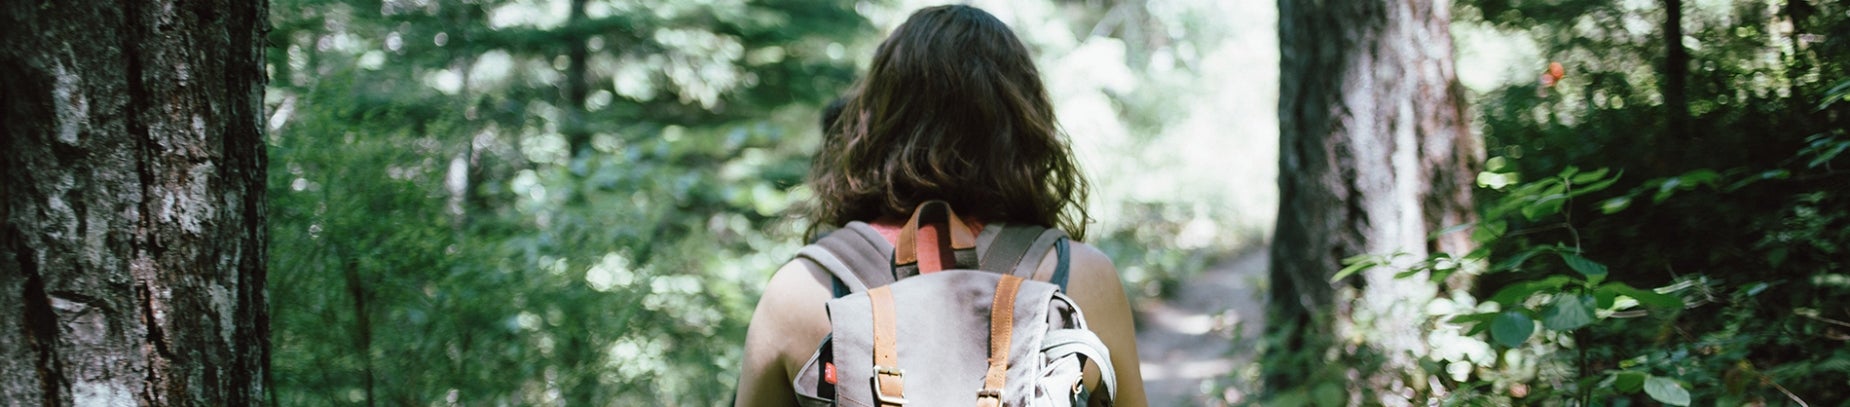 A women with a backpack walking through a forest